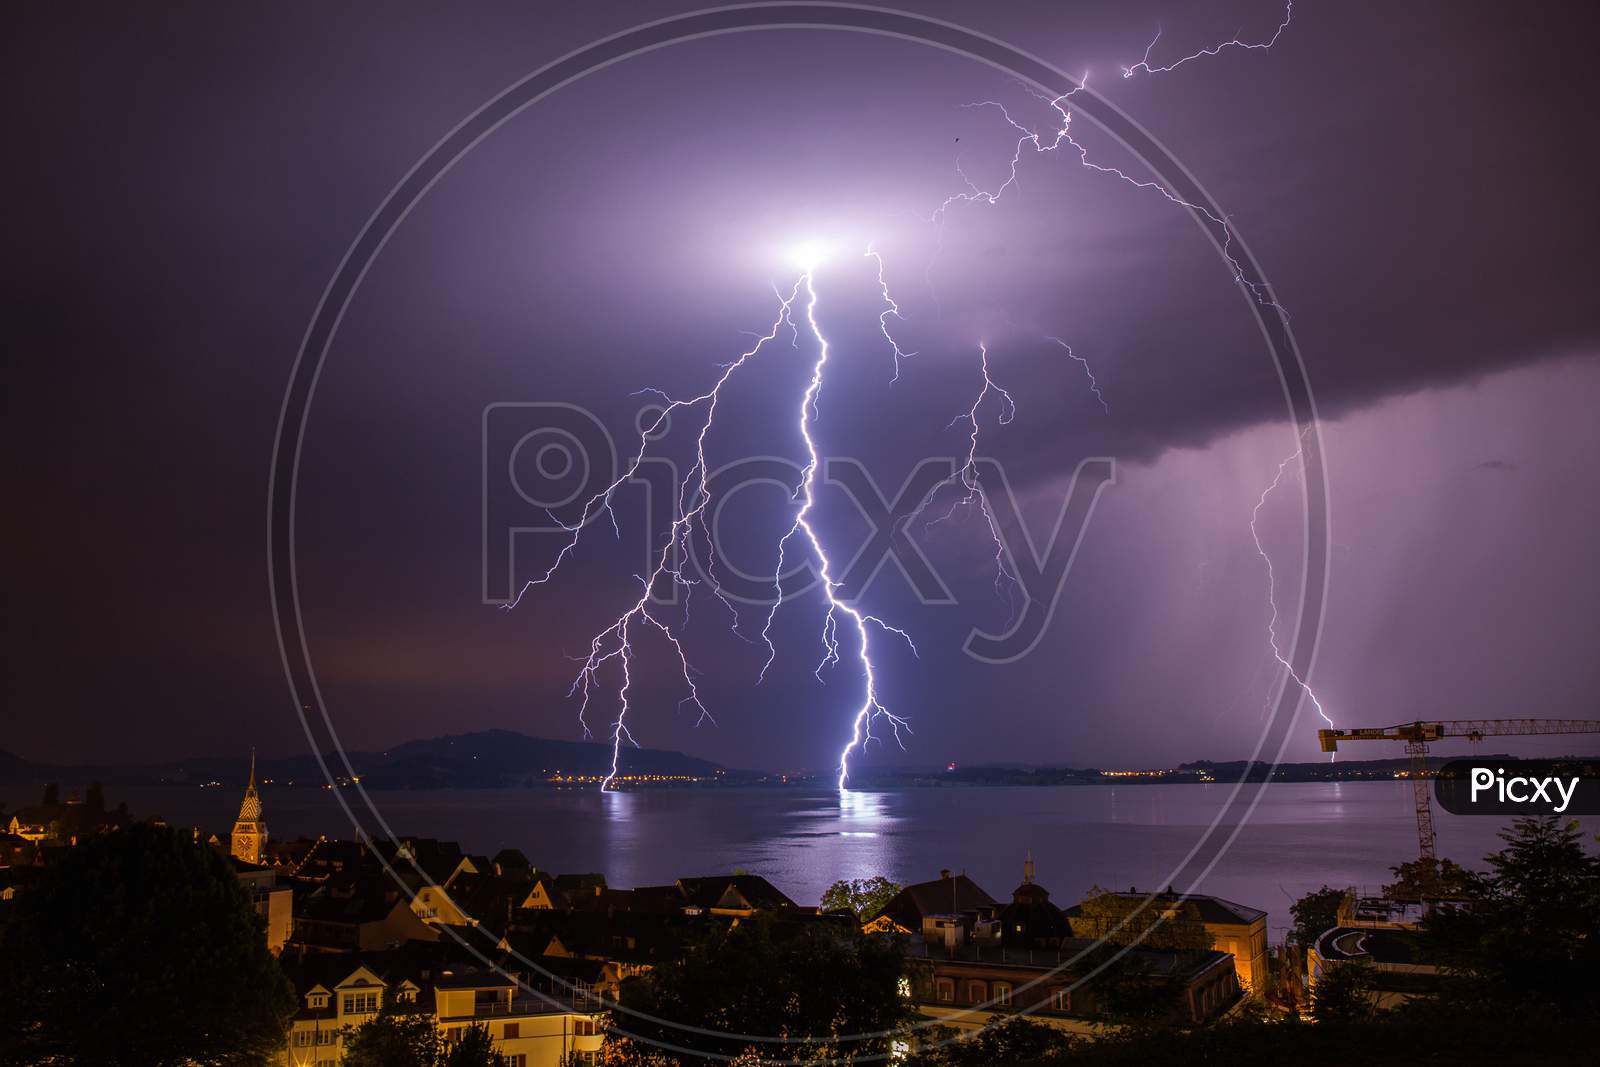 Thunderstorm Blitz Seen In Switzerland. Large Lightning That Has High And Large Strength. Will Be At Very Fatal Risk If Exposed To Humans. Natural Disasters That Are Very Beautiful But Must Be Avoided.